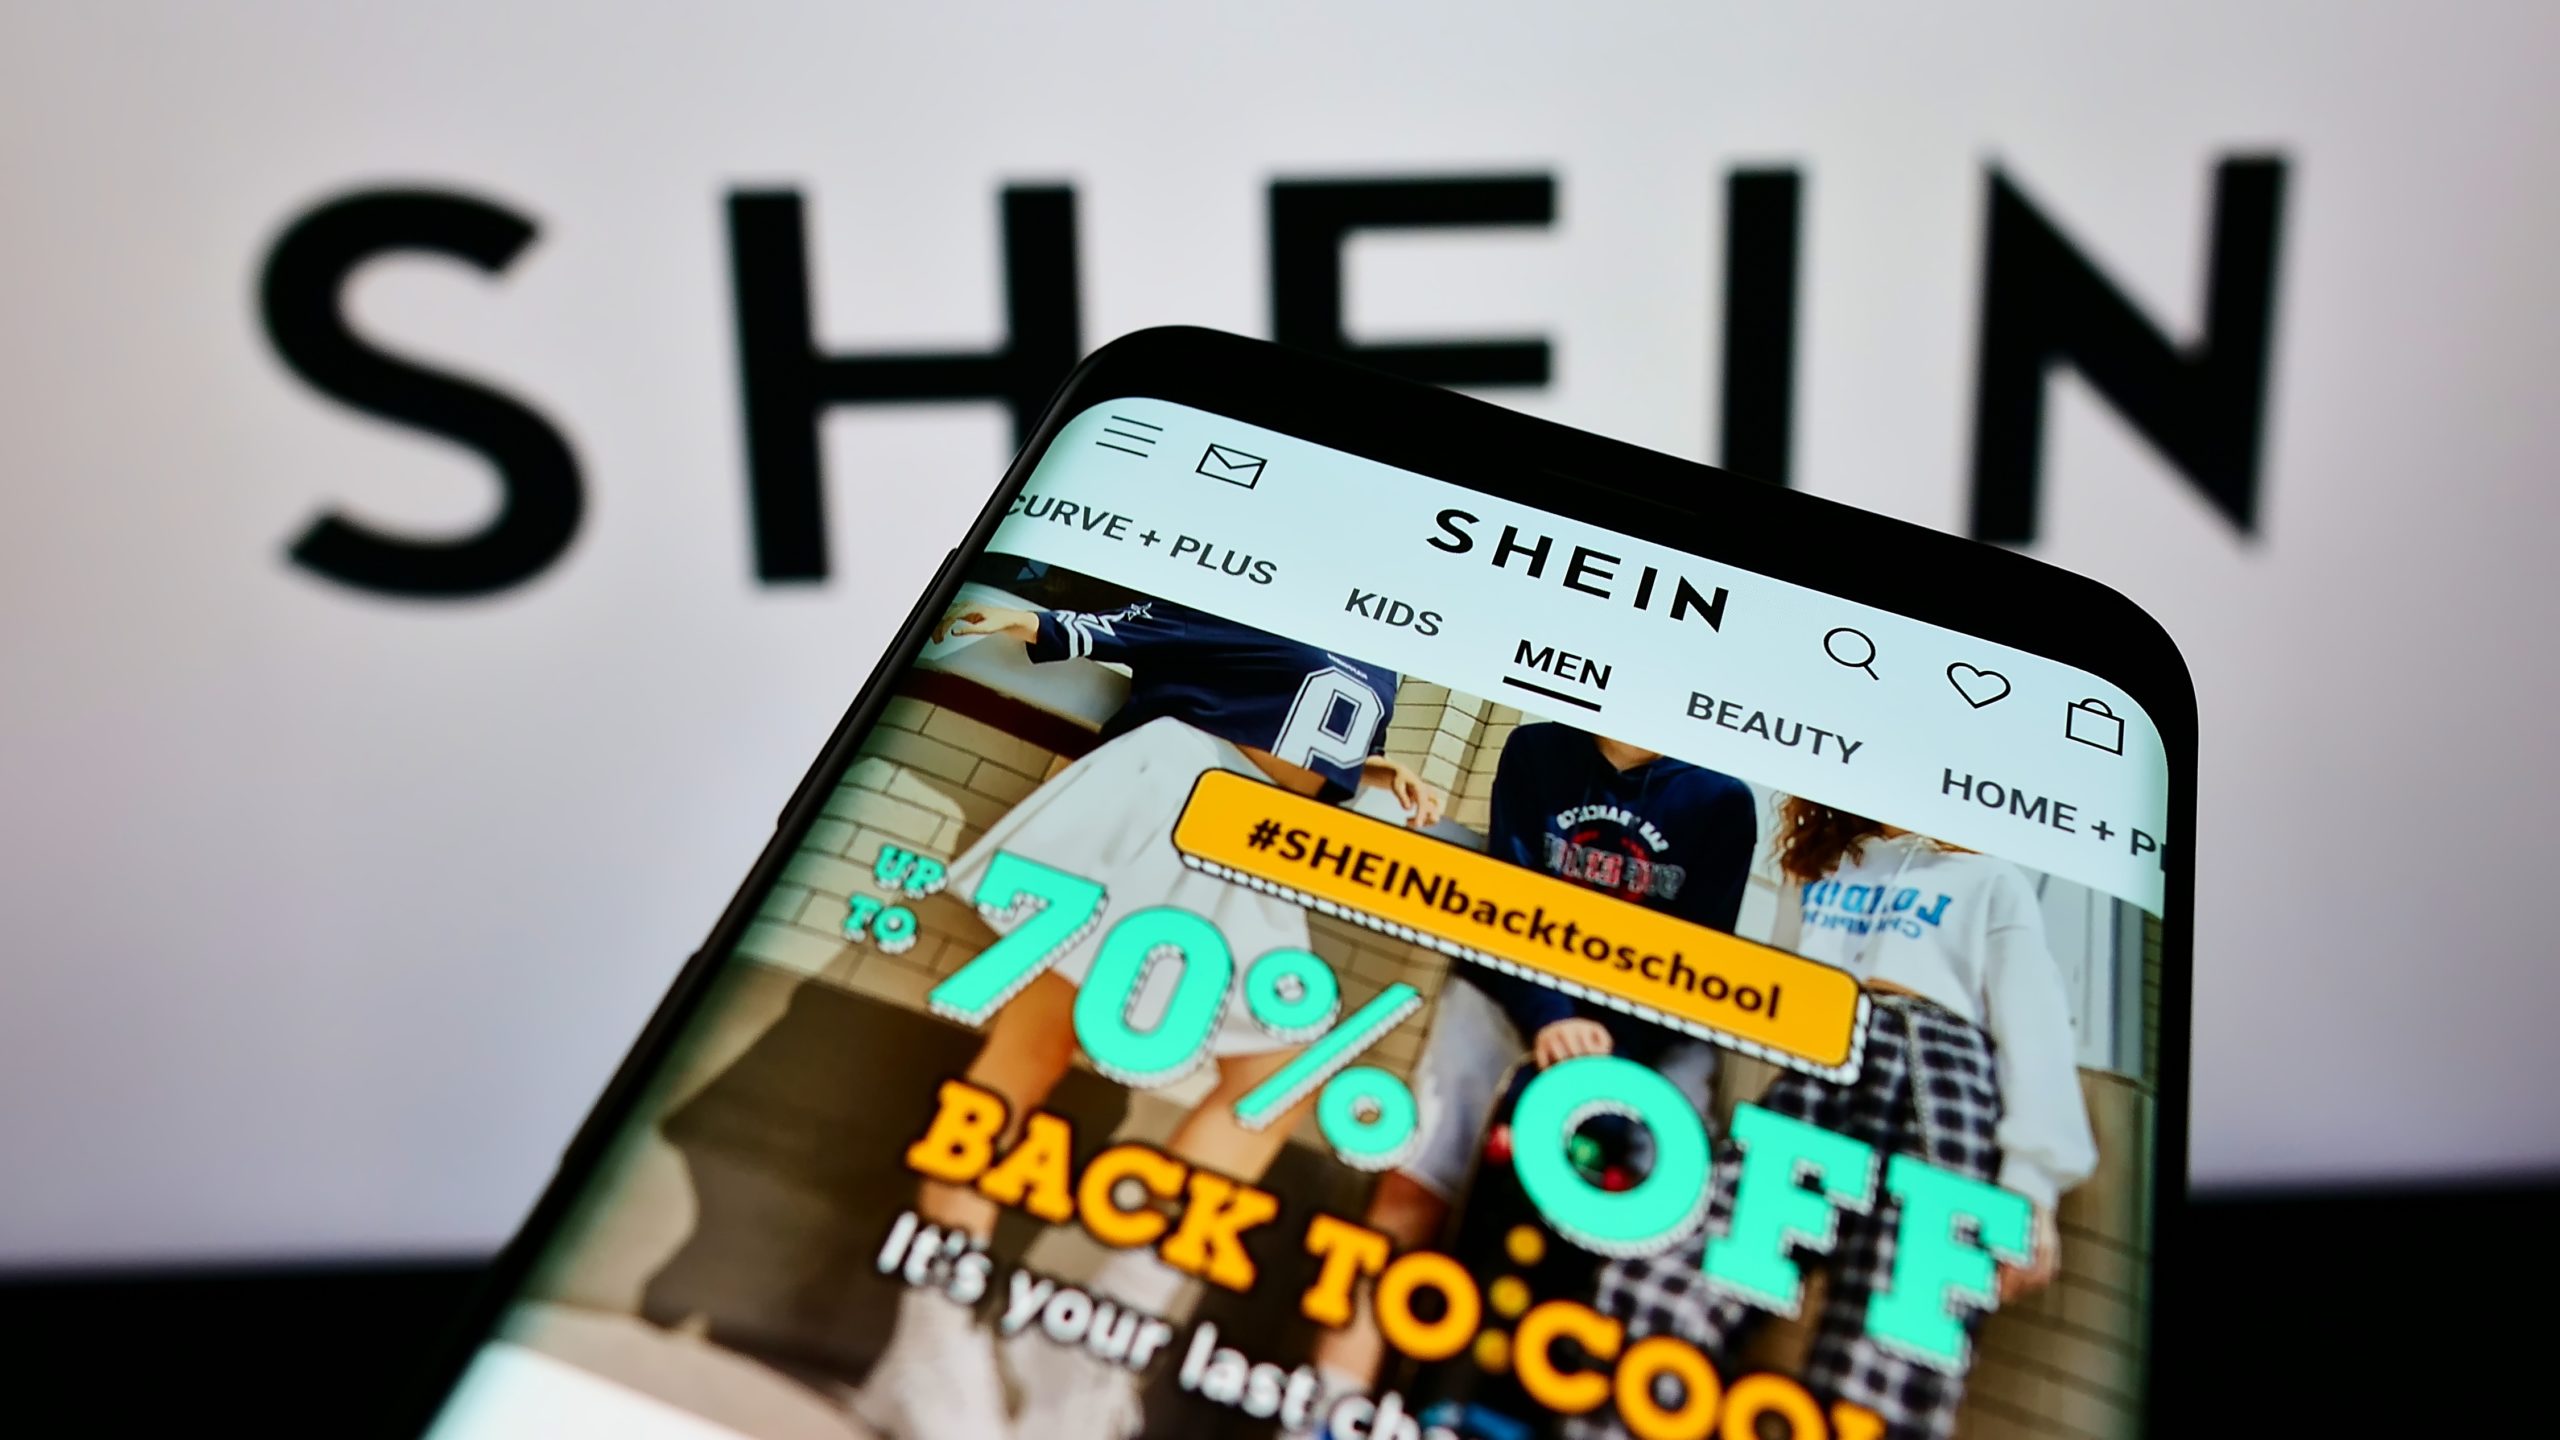 Shein and Shopee’s situation has unpleasant news for customers